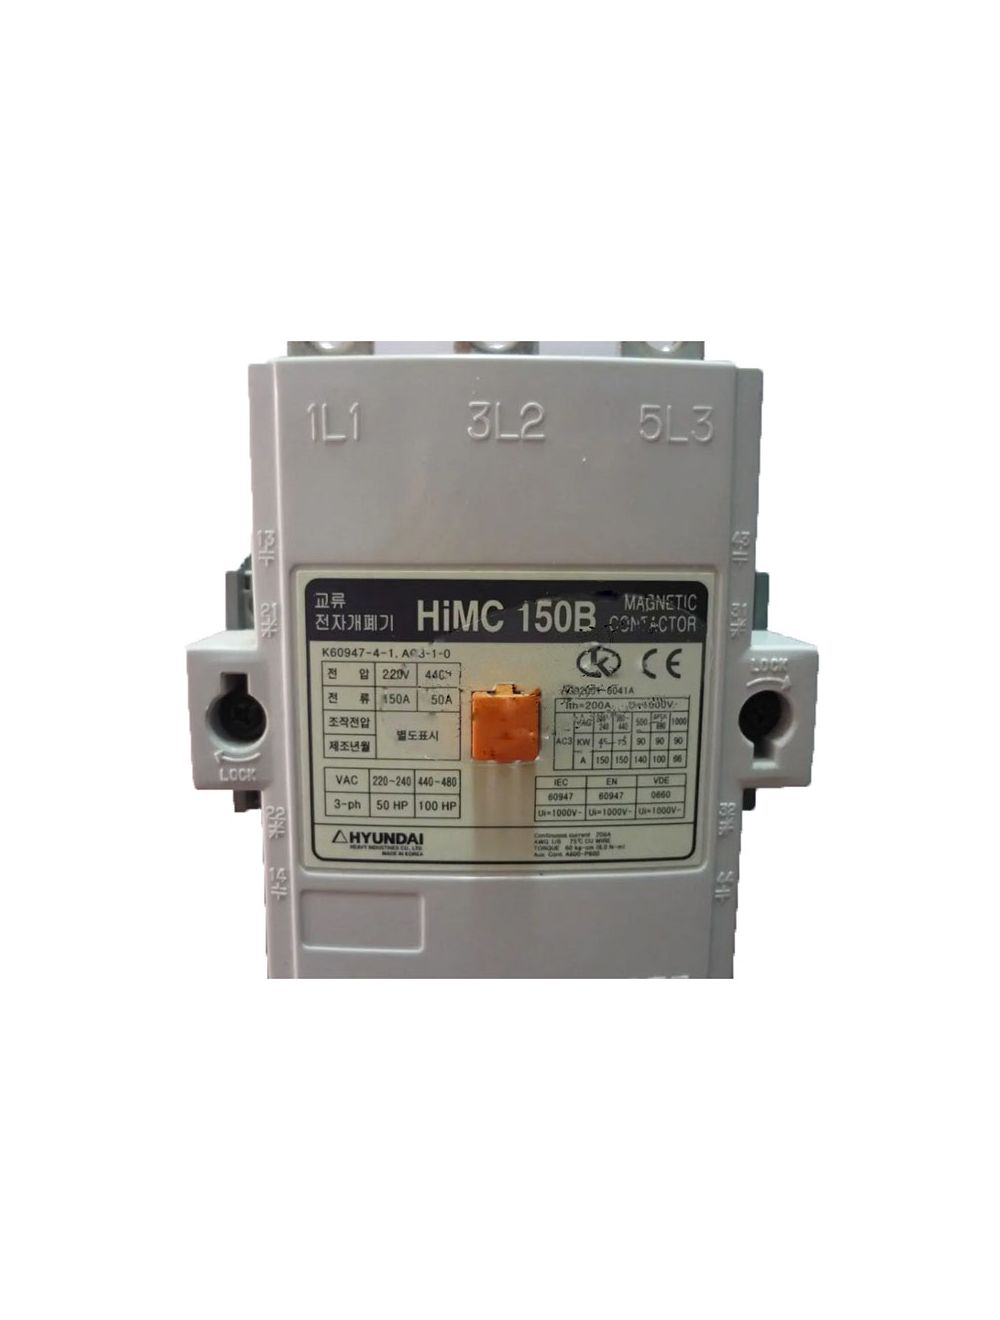 New In stock for sale, HYUNDAI Contactor HiMC150B